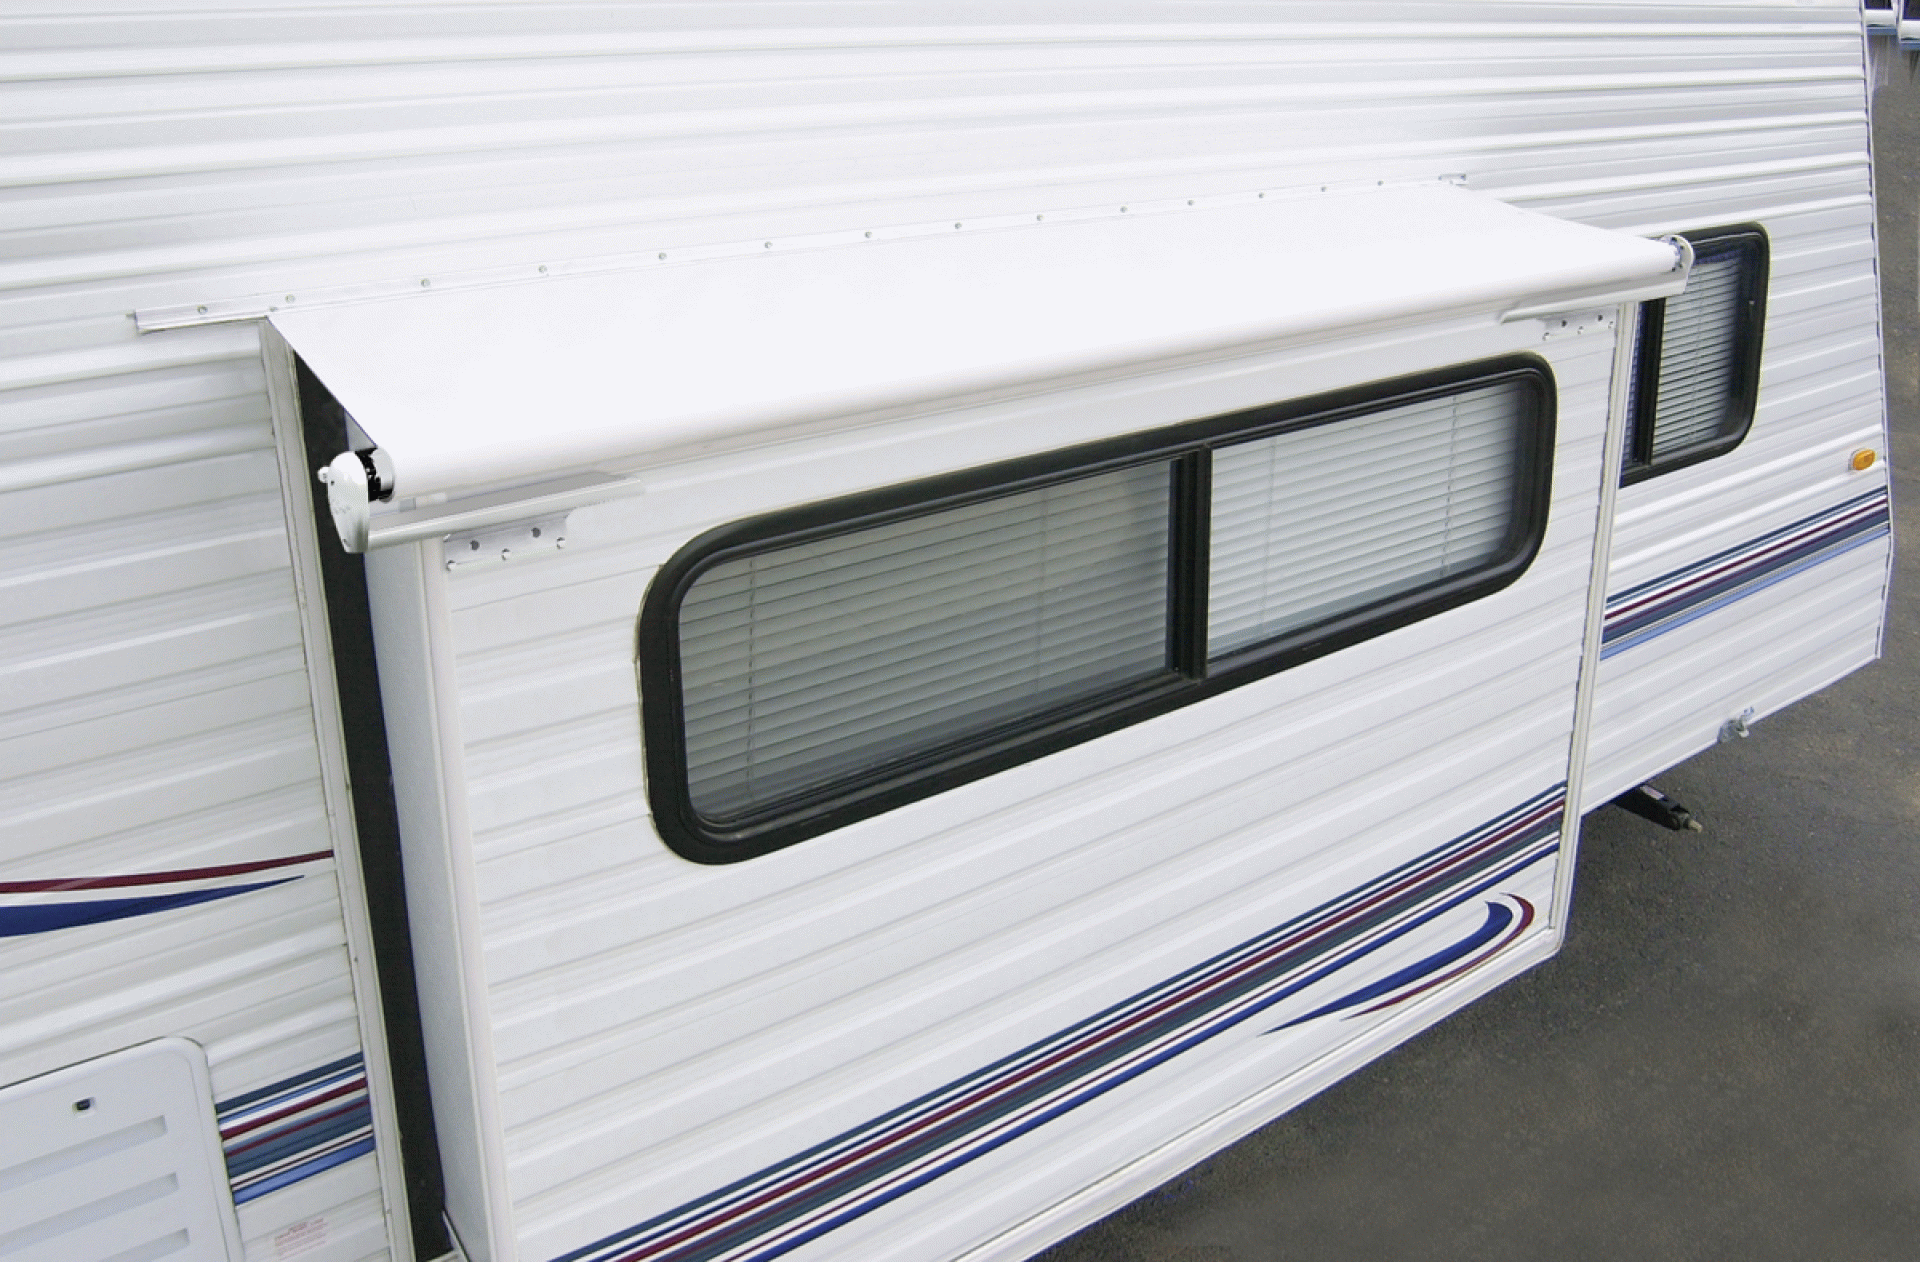 CAREFREE OF COLORADO | LH0976242 | Slideout Cover Awning 90" - 97.9" Roof Range Solid Black Vinyl